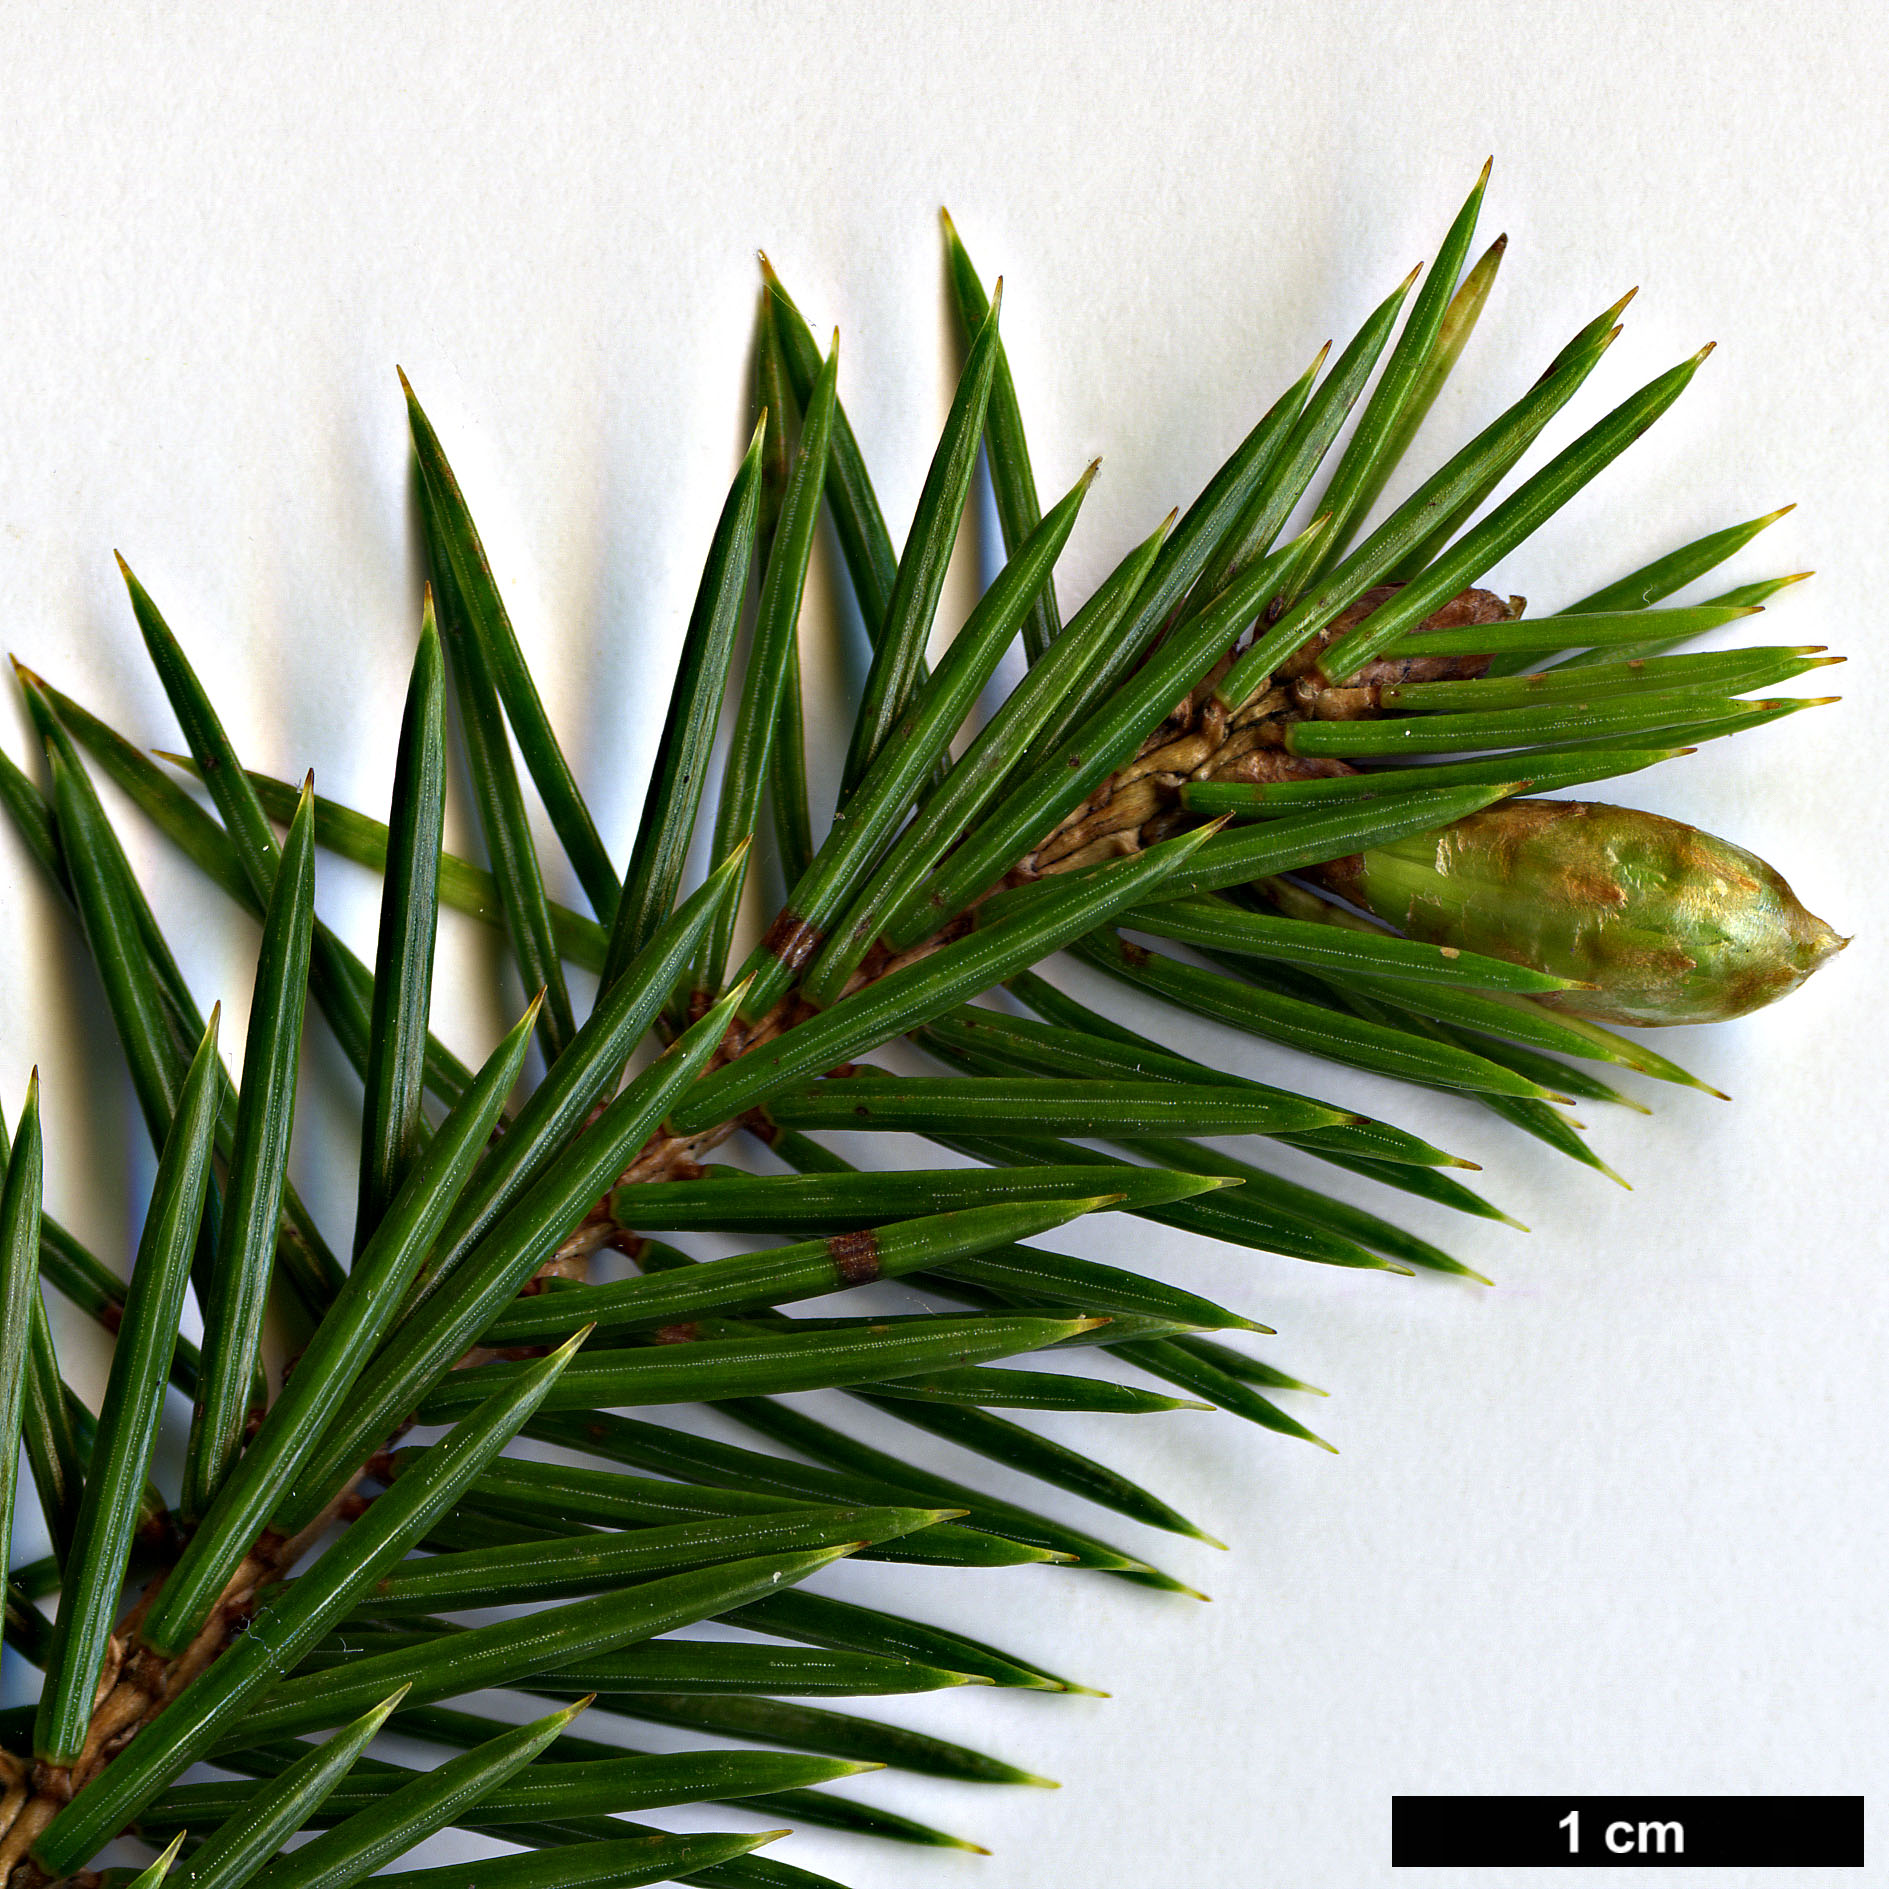 High resolution image: Family: Pinaceae - Genus: Picea - Taxon: sitchensis